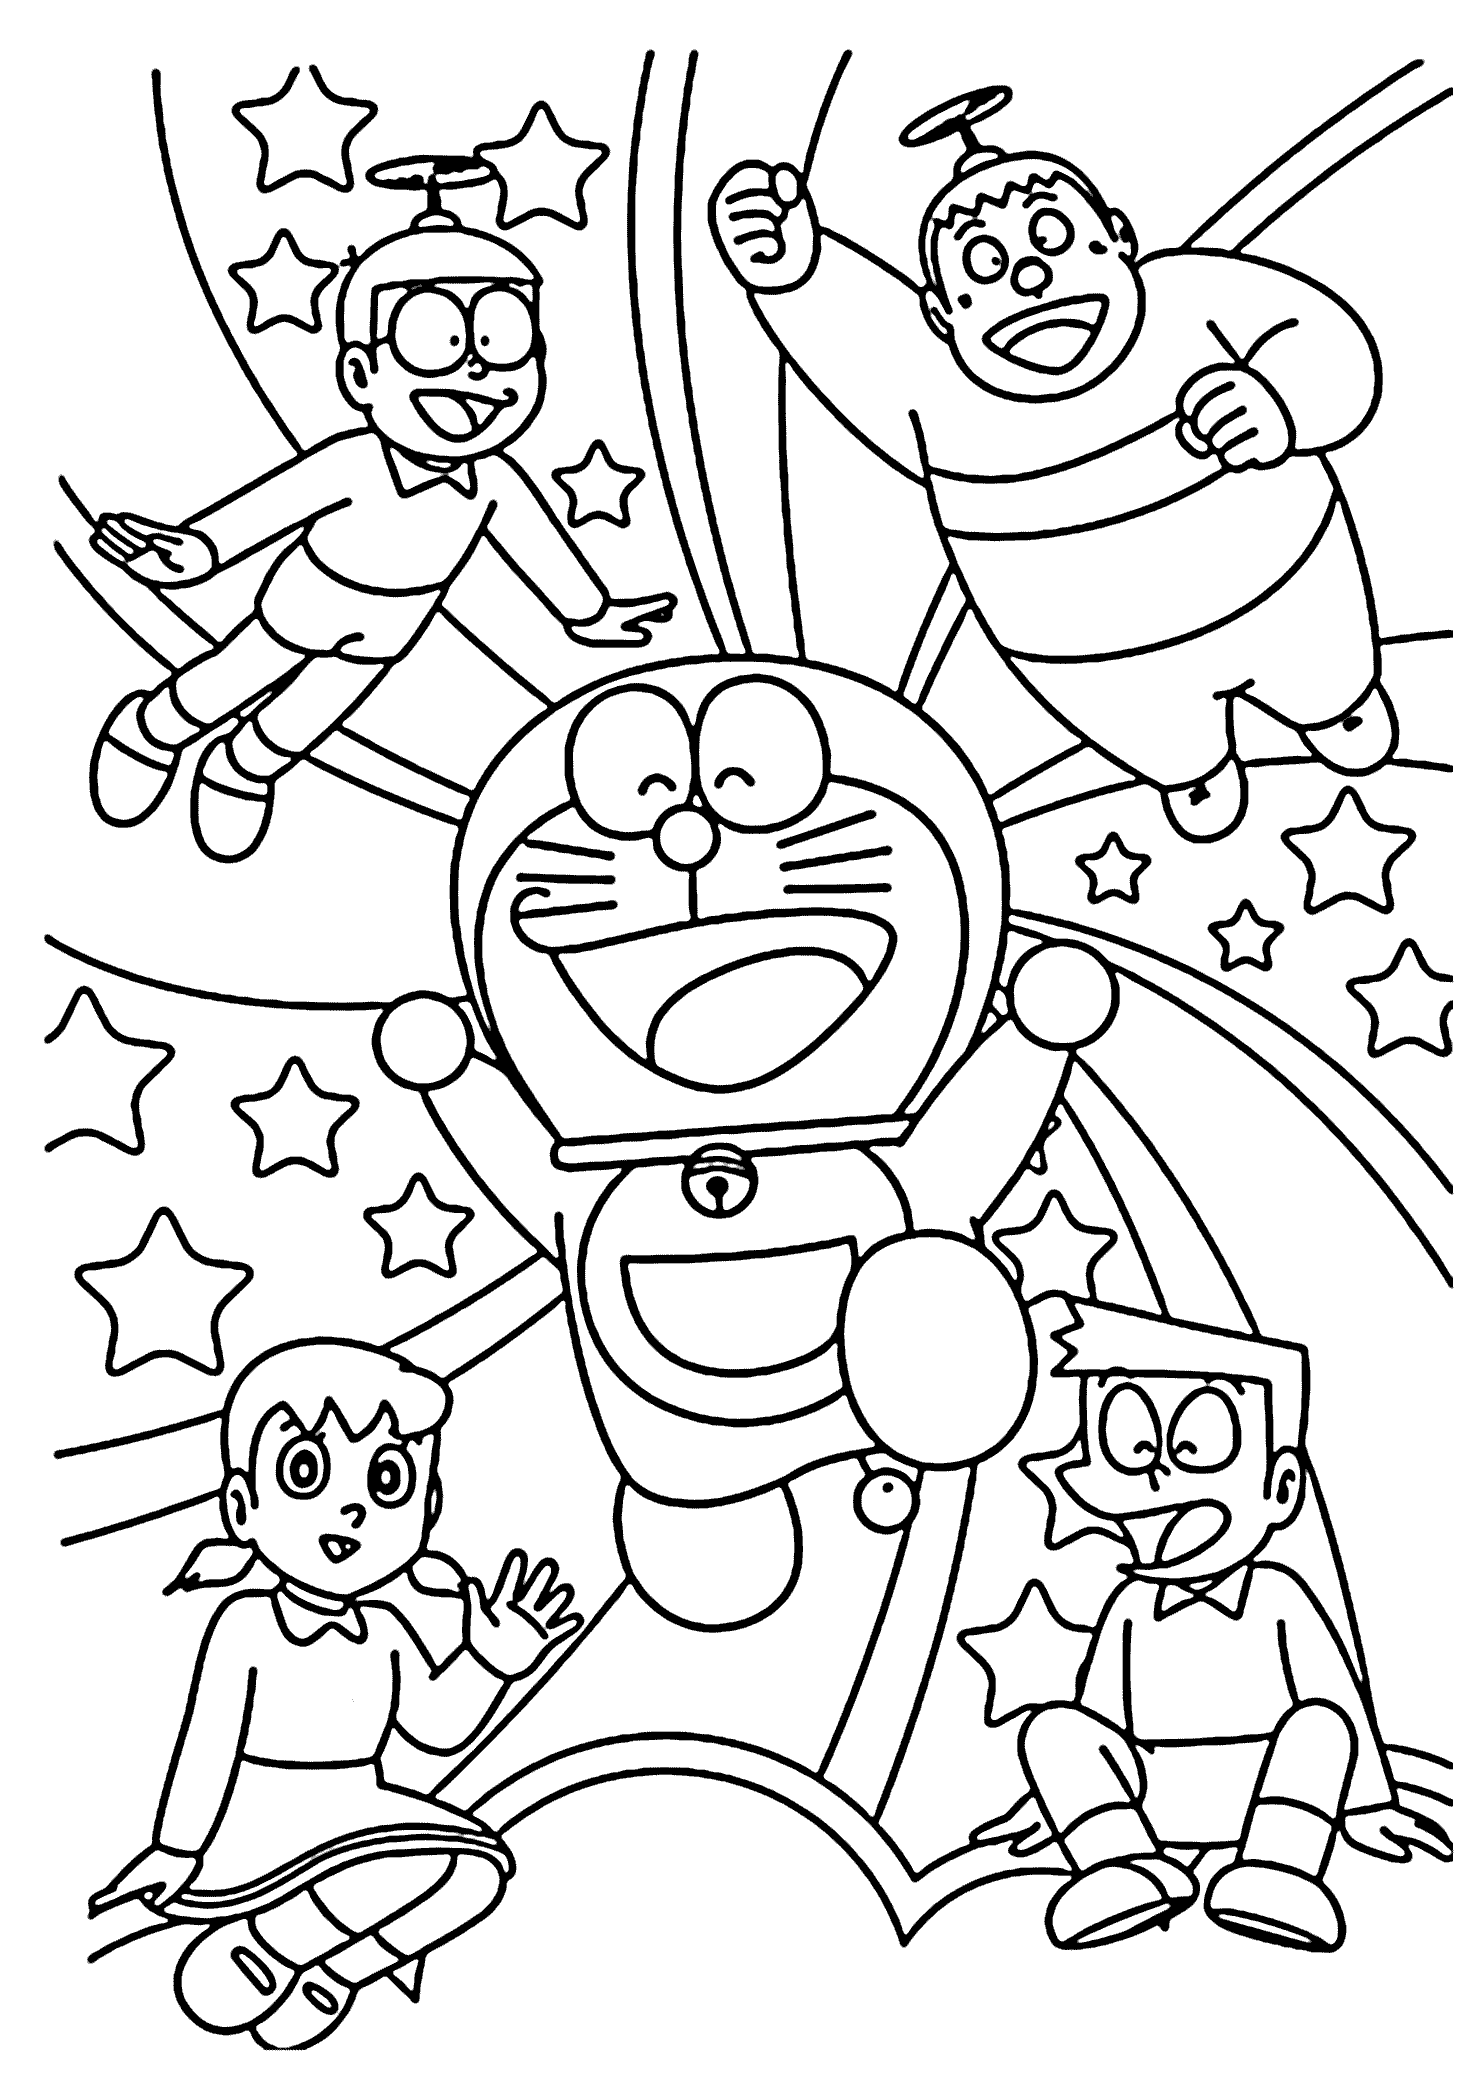 doraemon and friends colouring pages | coloring Pages 